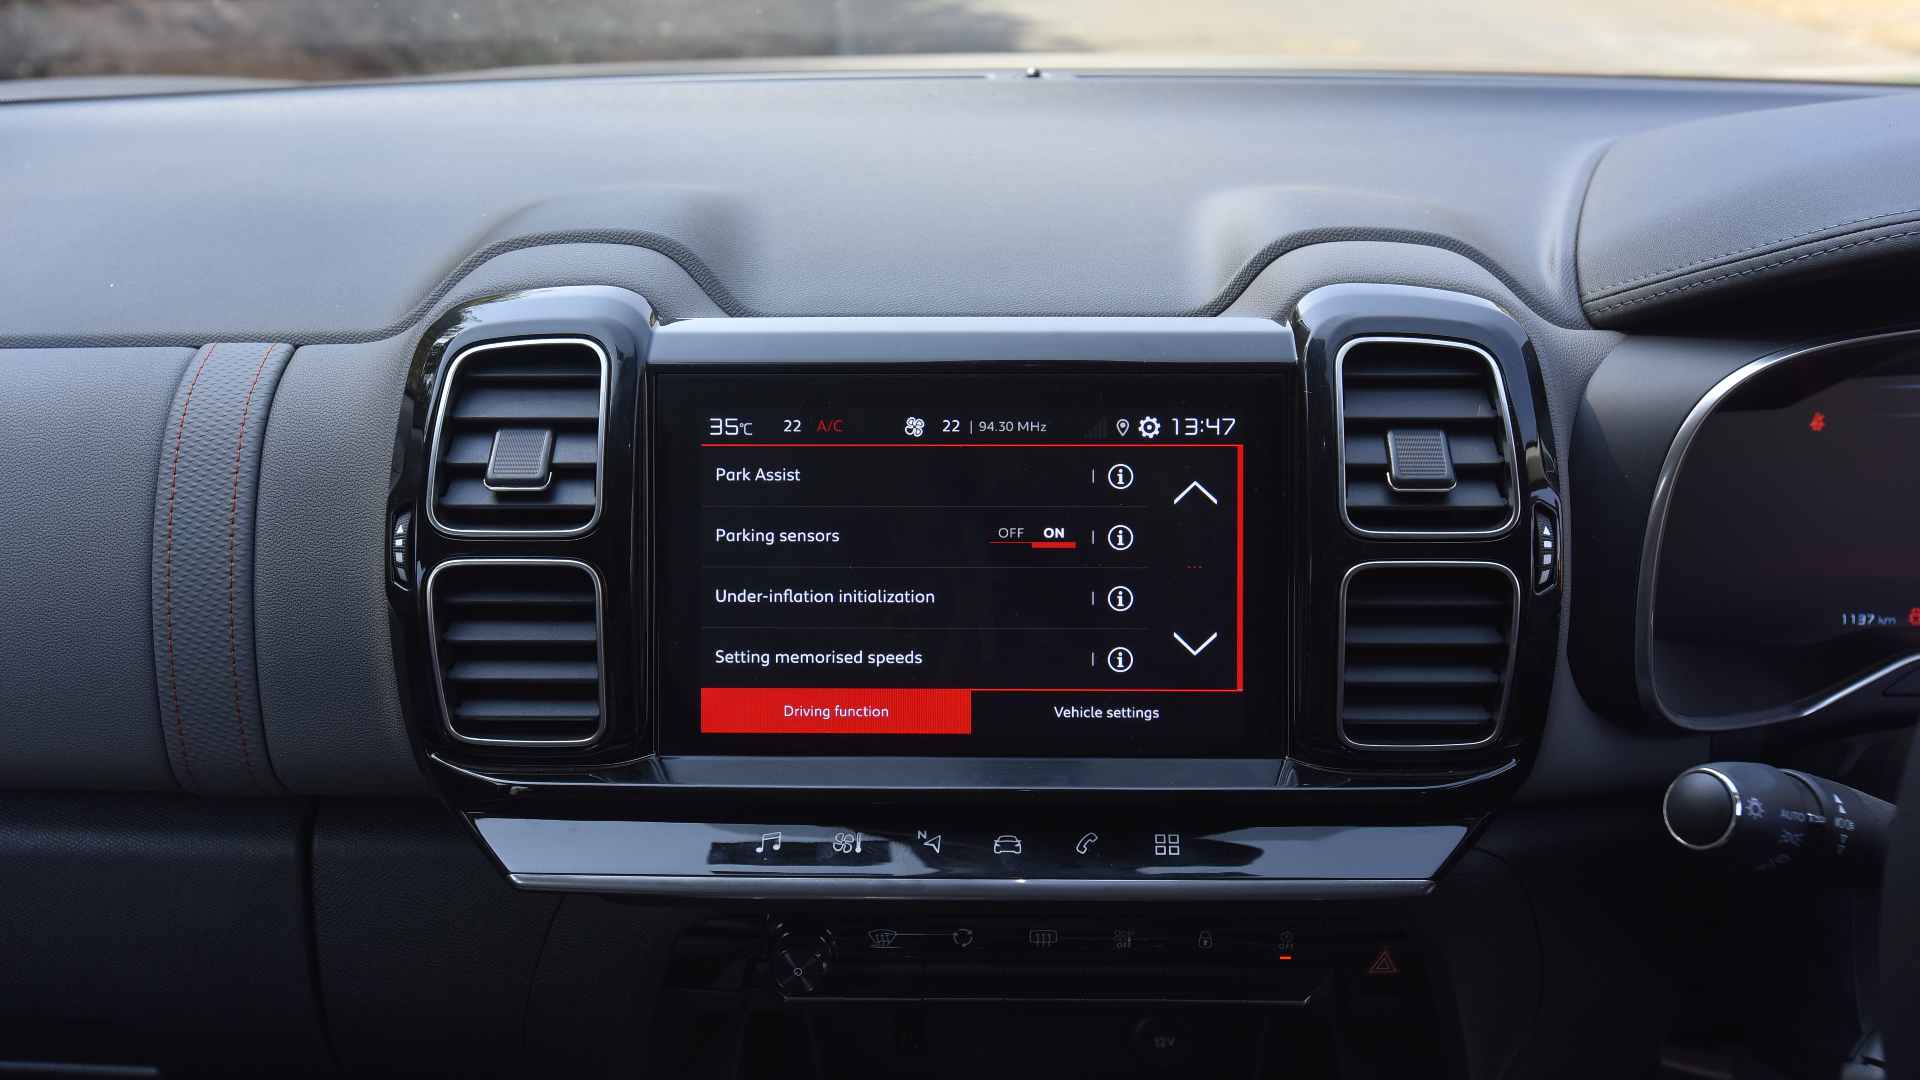 The C5's infotainment feels a bit dated and misses out on wireless Apple CarPlay/Android Auto. Image: Overdrive/Anis Shaikh